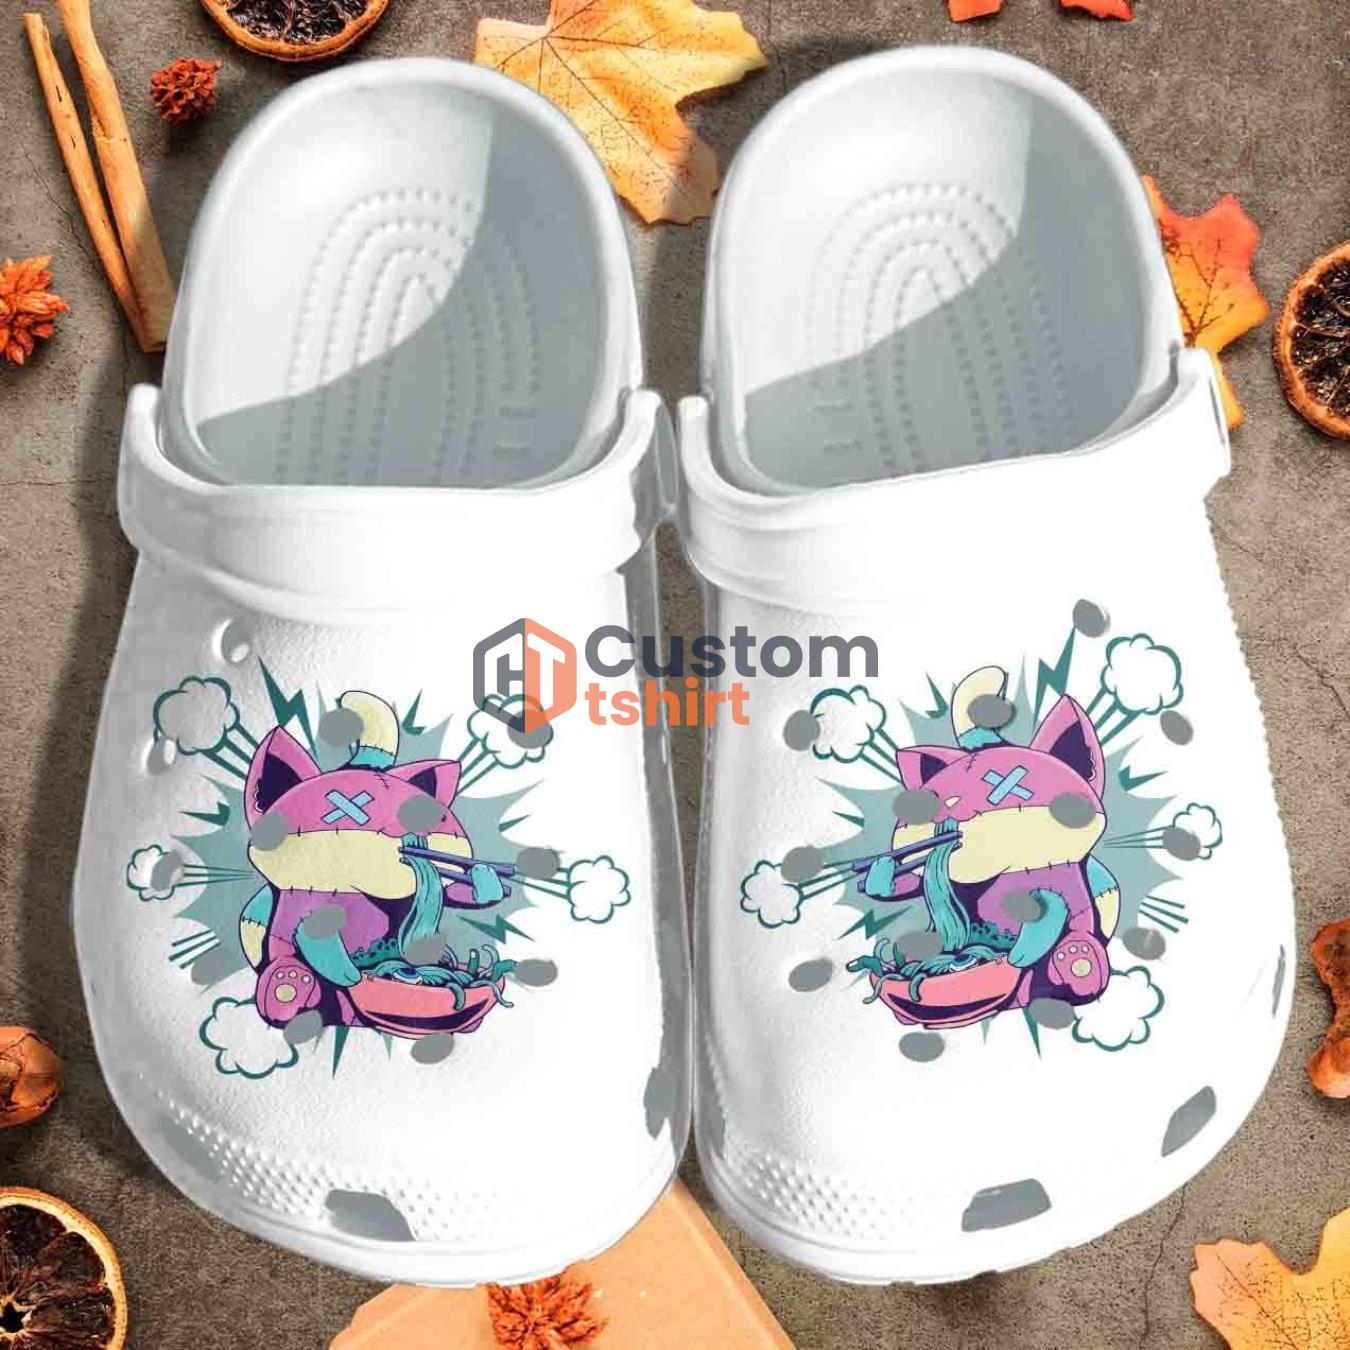 Pastel Goth Ramen Cat Clog Shoes - Anime Kawaii Clog Shoes Birthday Gift For Girl Daughter Niece Product Photo 1 Product photo 1